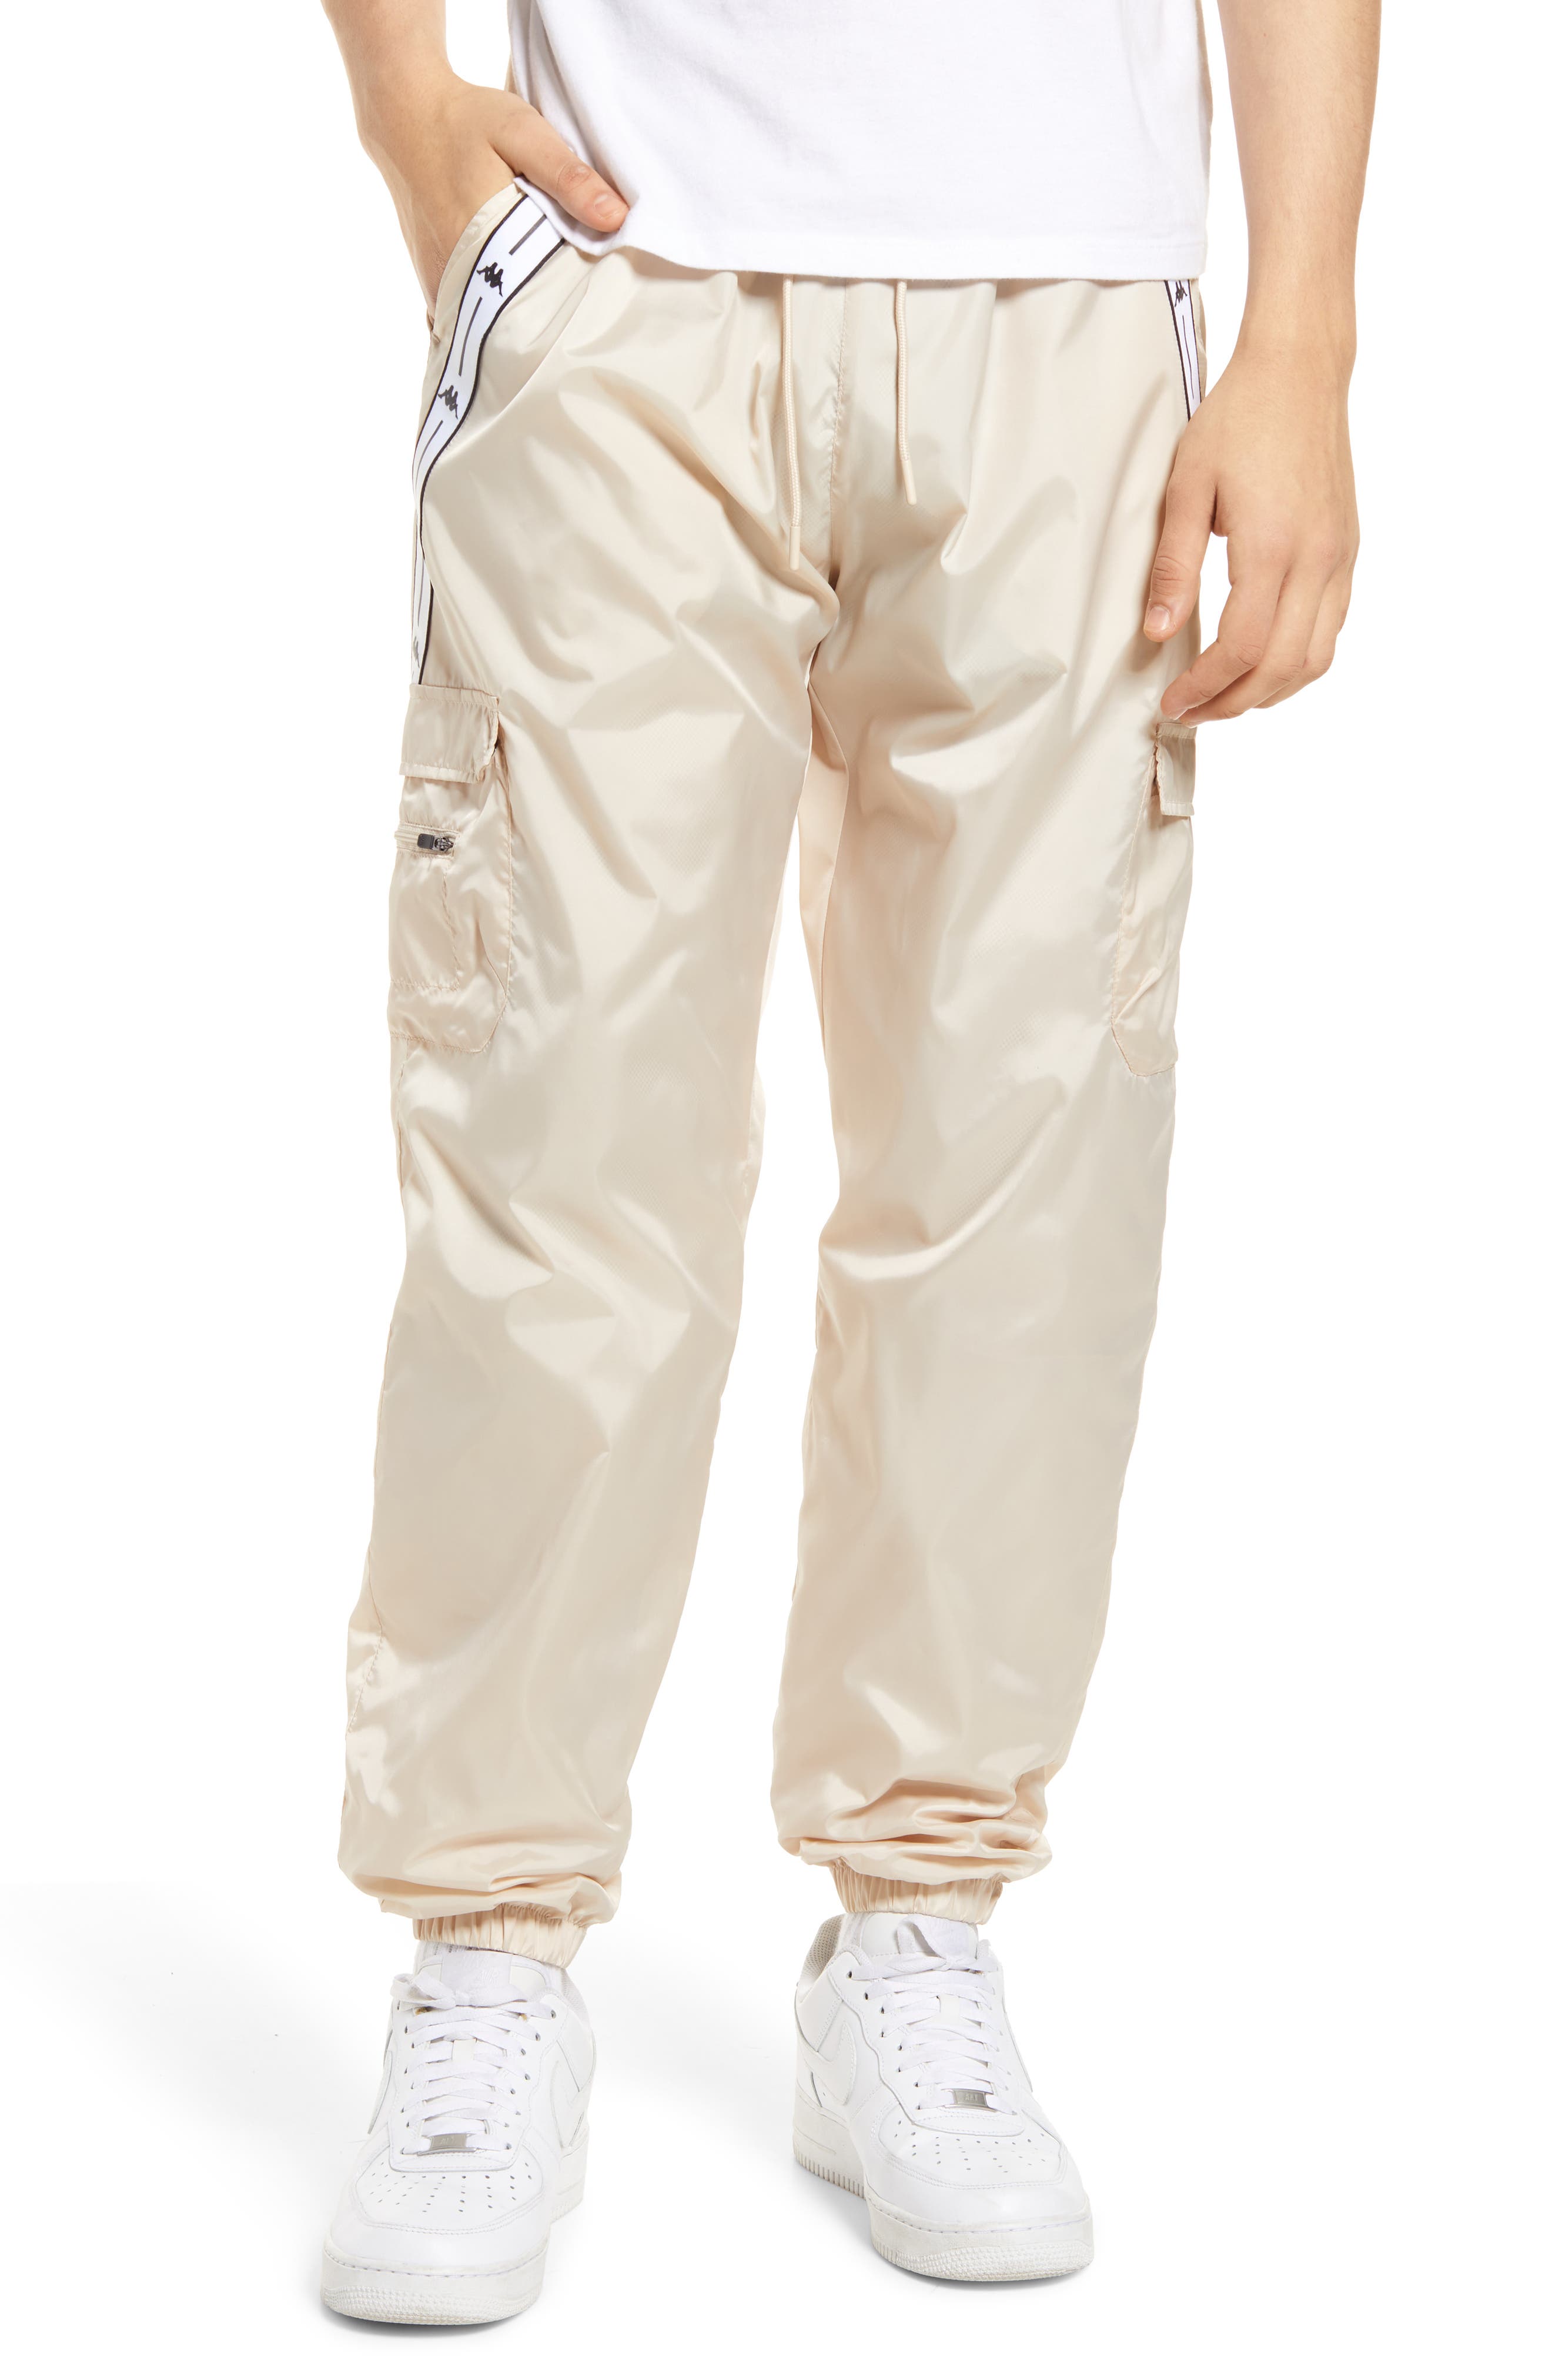 Kappa Men's Authentic Gdansk Cargo Jogger Pants in Beige Parchment at Nordstrom, Size Small